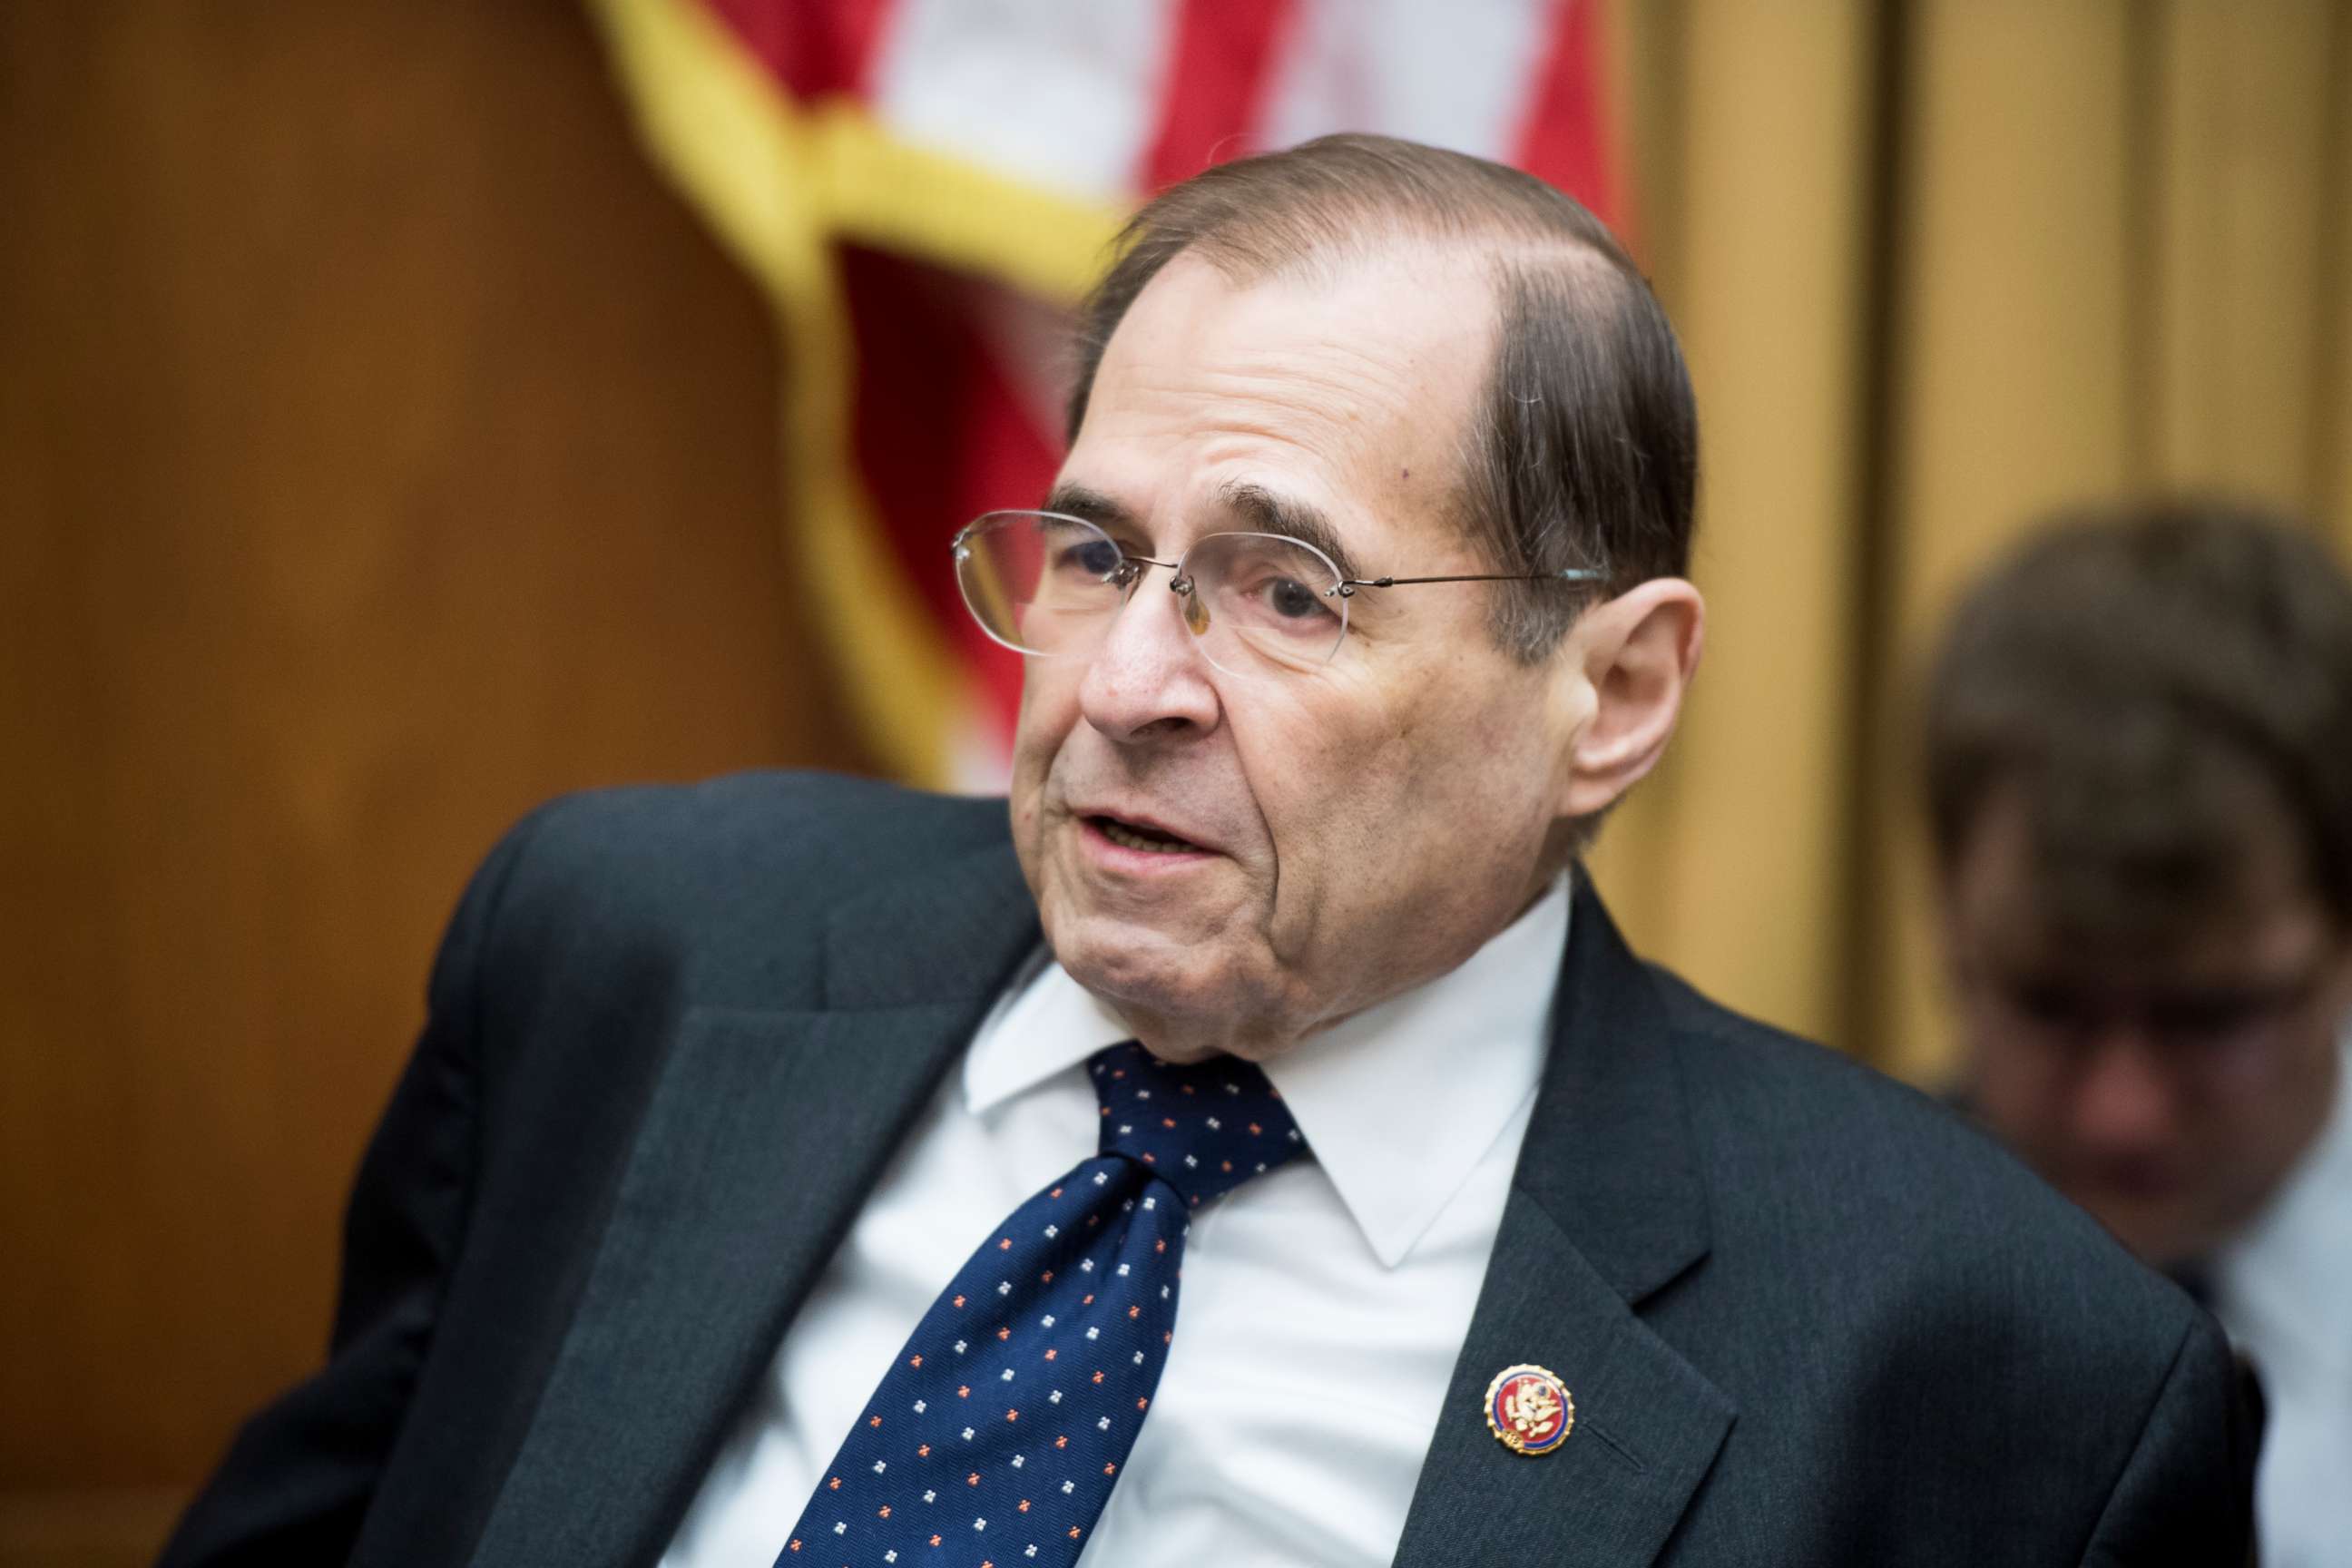 PHOTO: Chairman Rep. Jerry Nadler arrives for a House Judiciary Constitution, Civil Rights and Civil Liberties Subcommittee hearing in Washington, April 30, 2019.